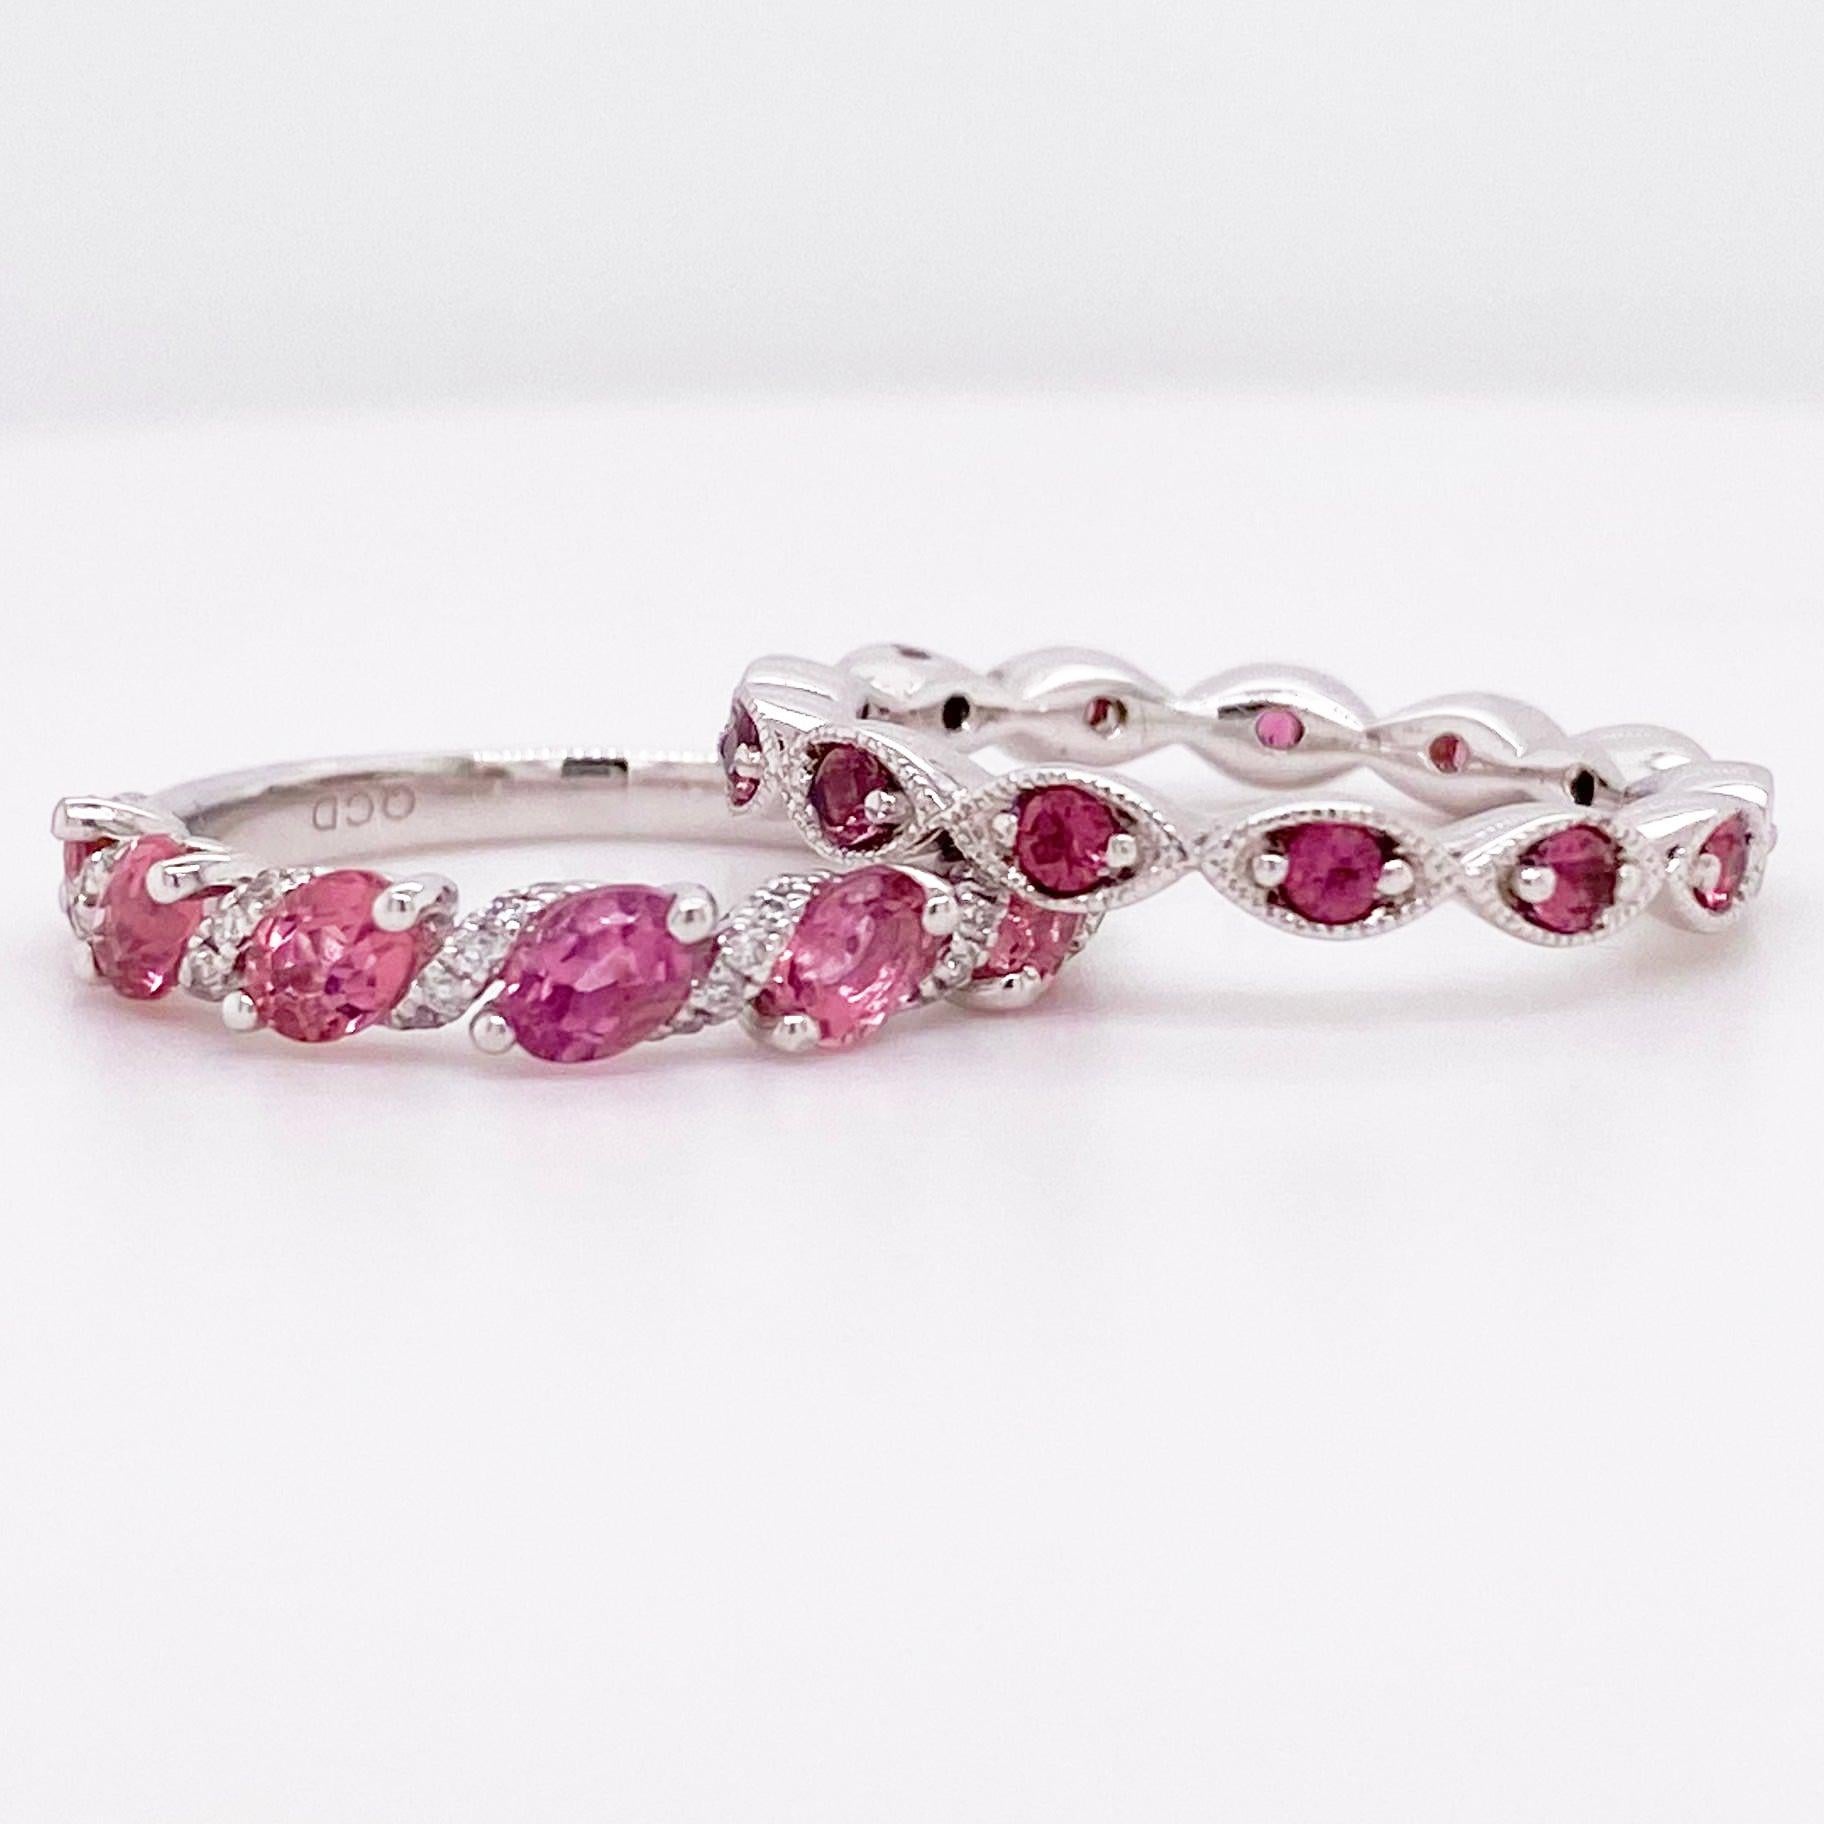 For Sale:  Pink Tourmaline Ring, Eternity Band, White Gold, Stackable, Pink Wedding Band 3